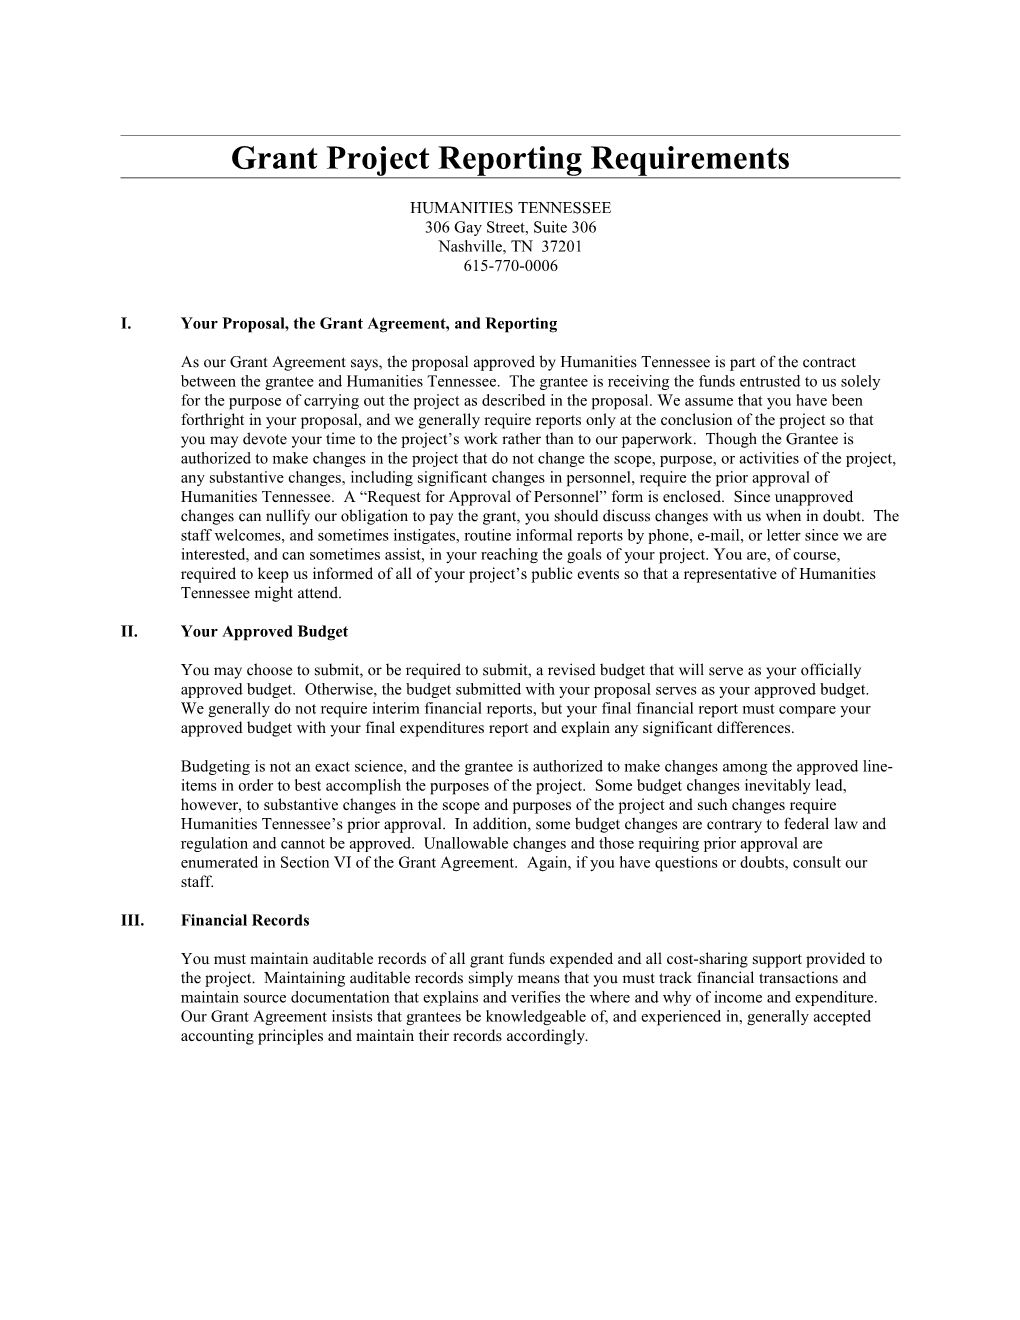 Grant Project Reporting Requirements